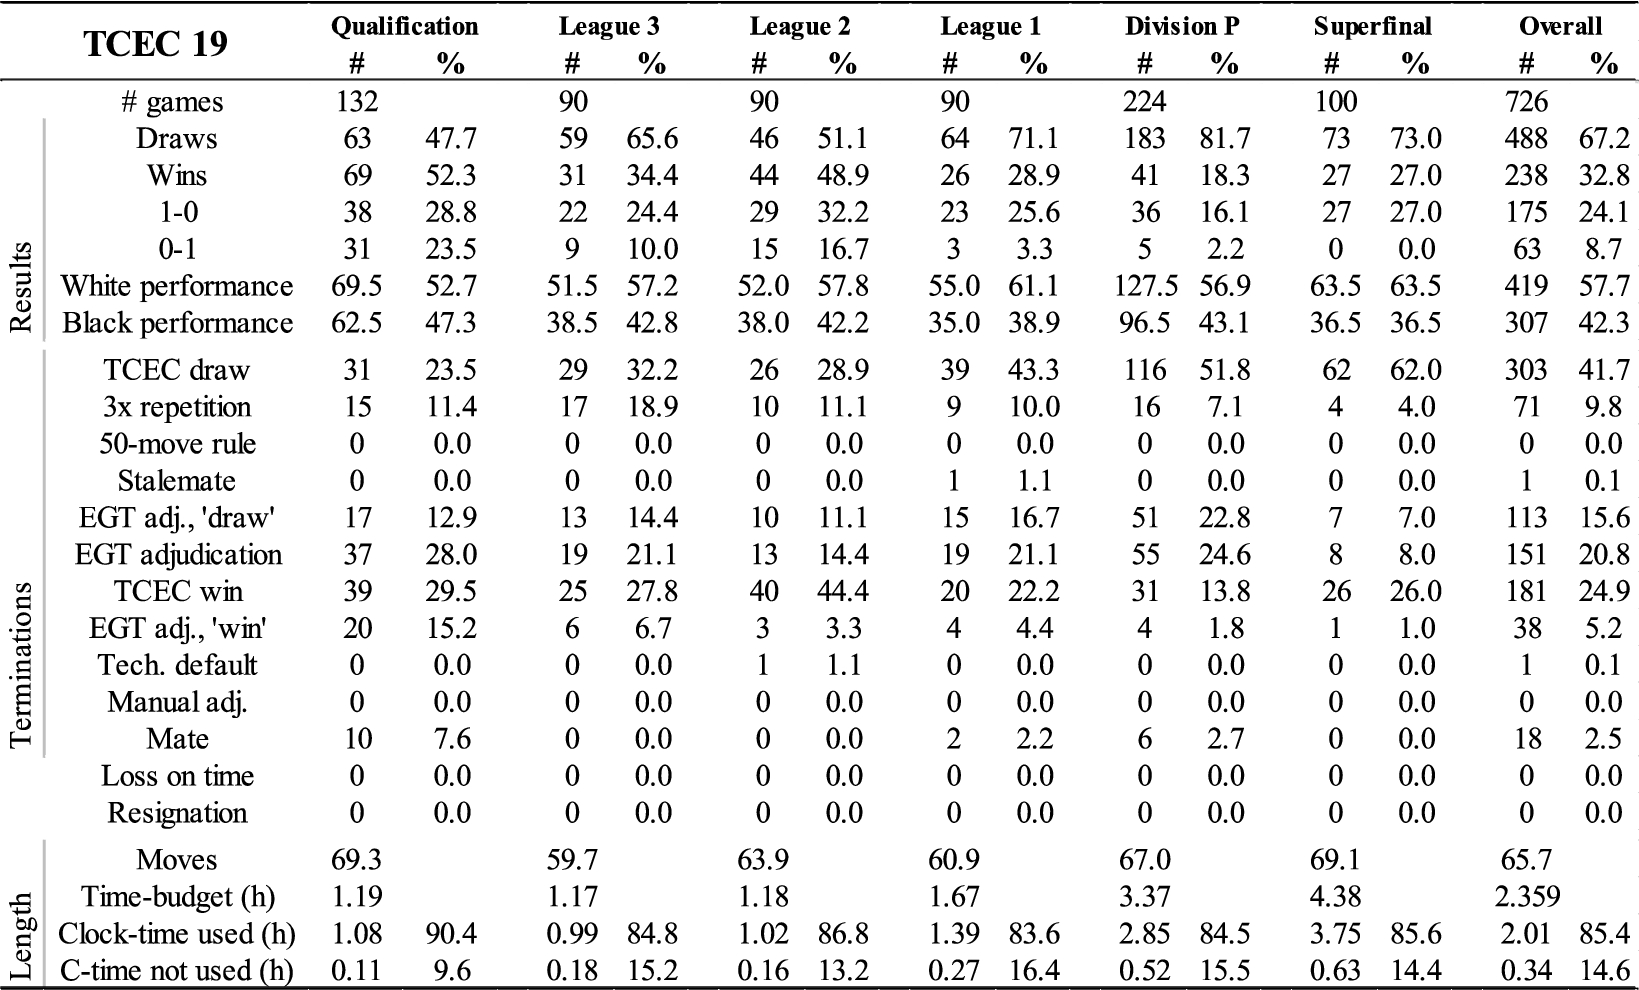 Generic statistics for each phase of TCEC19: results, terminations and average game-length